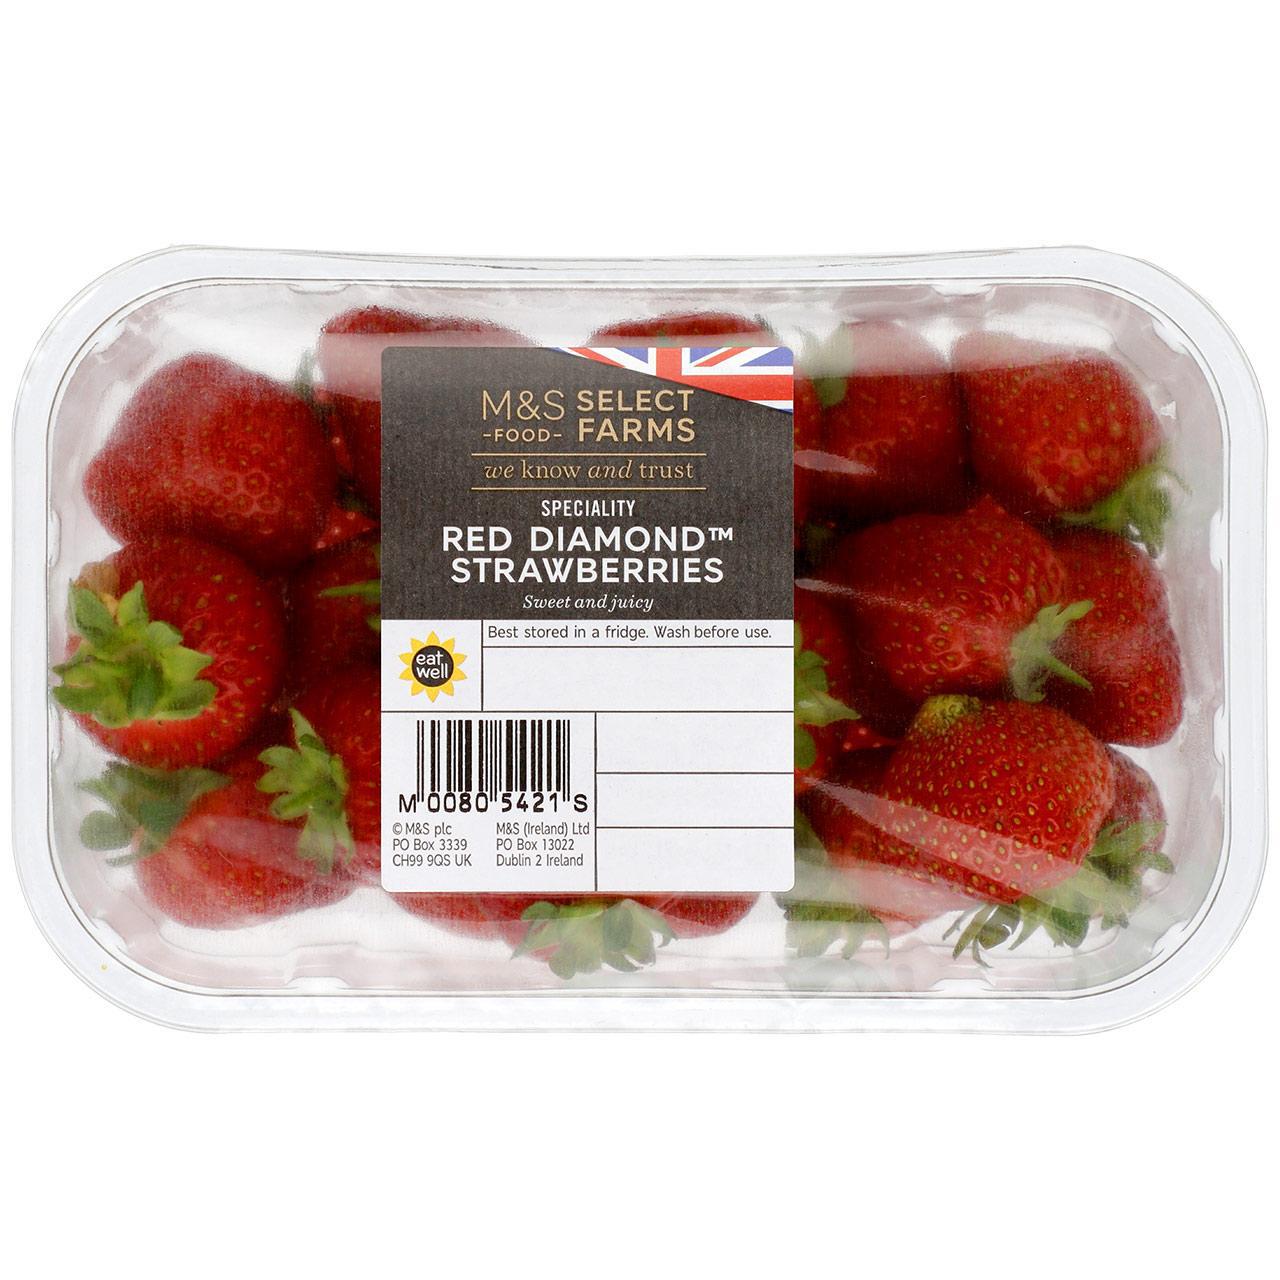 M&S Speciality Red Diamond Strawberries 400g